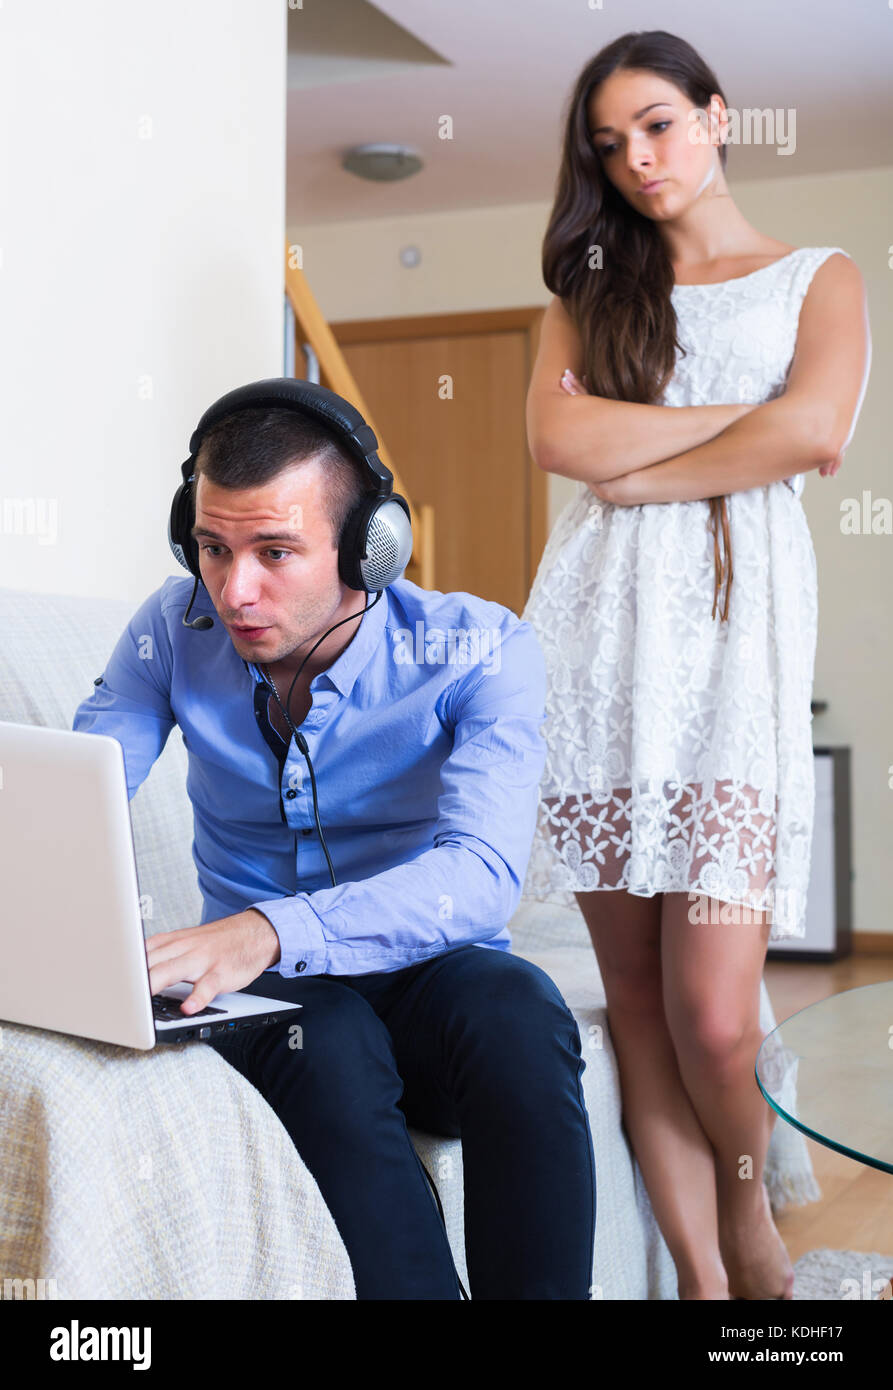 Sad young woman suspecting spouse spending money on games online Stock Photo